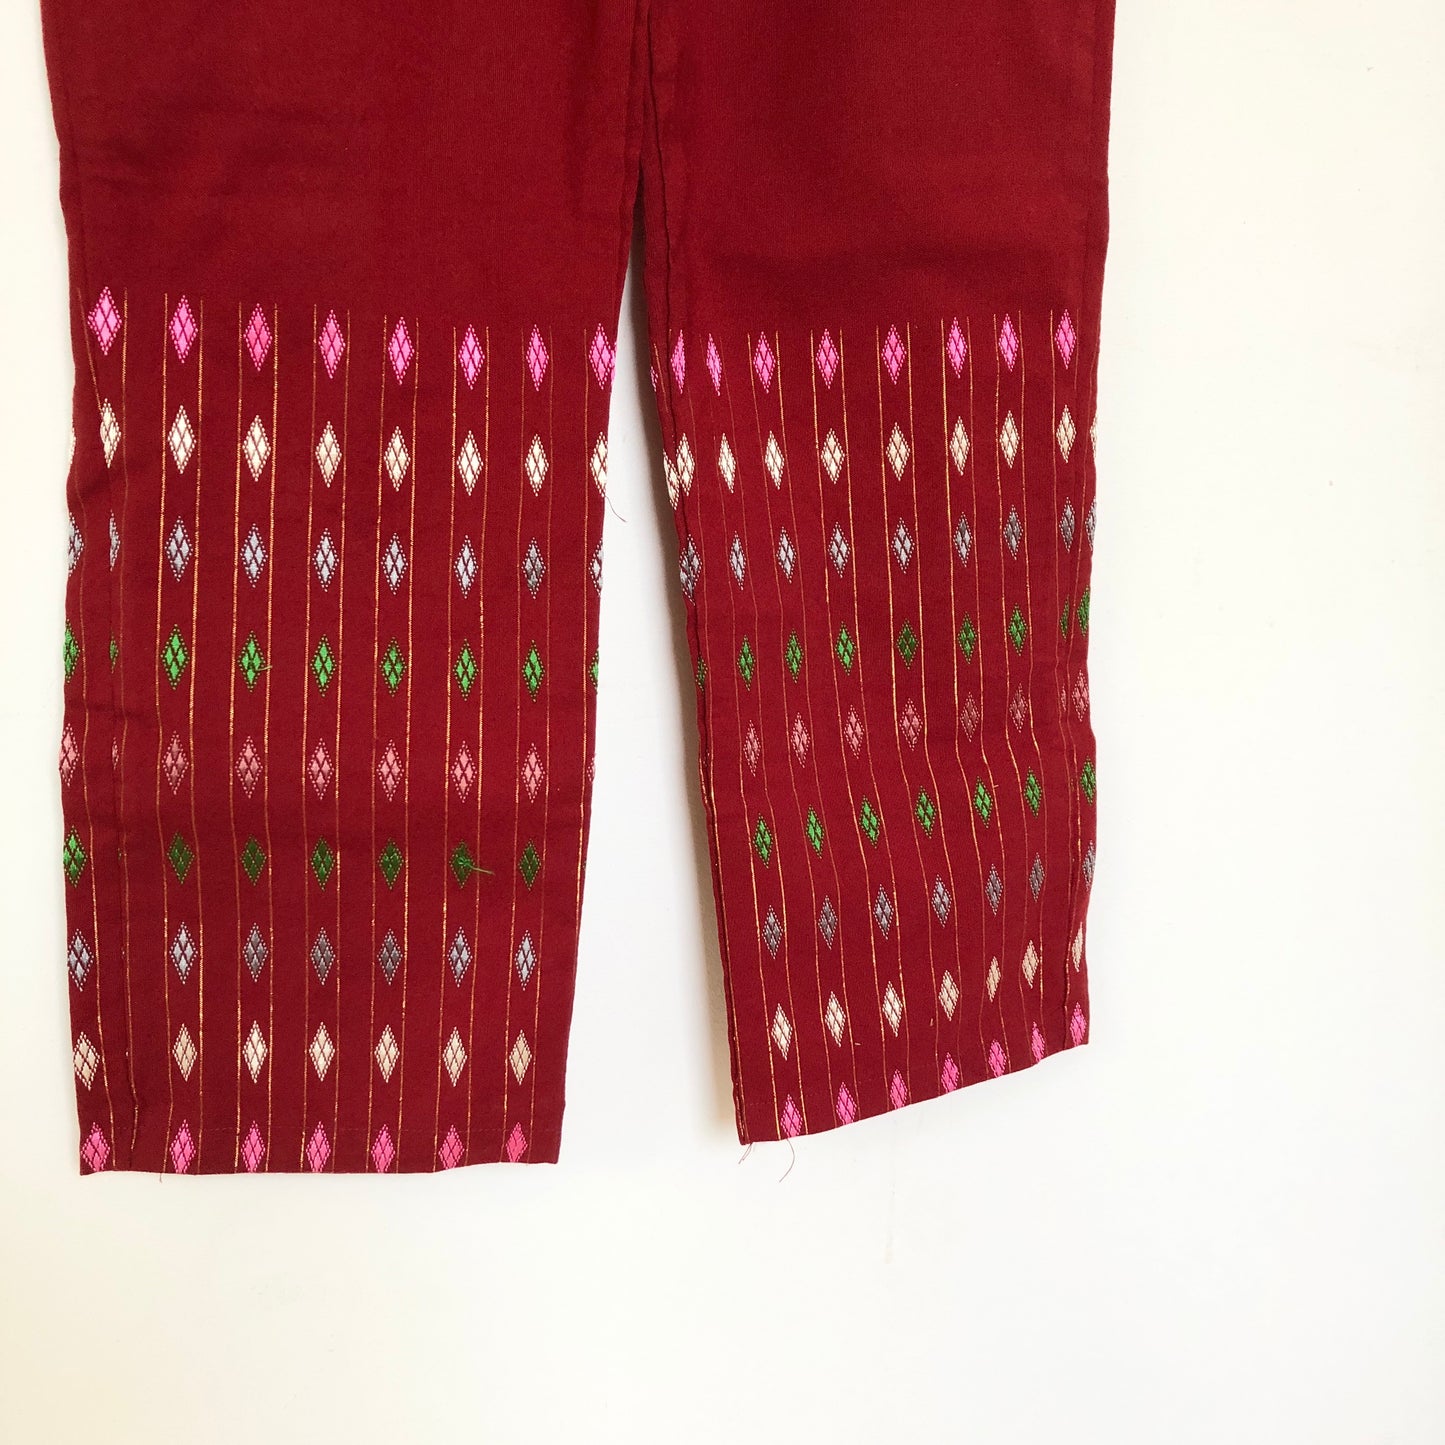 Red straight handwoven pants